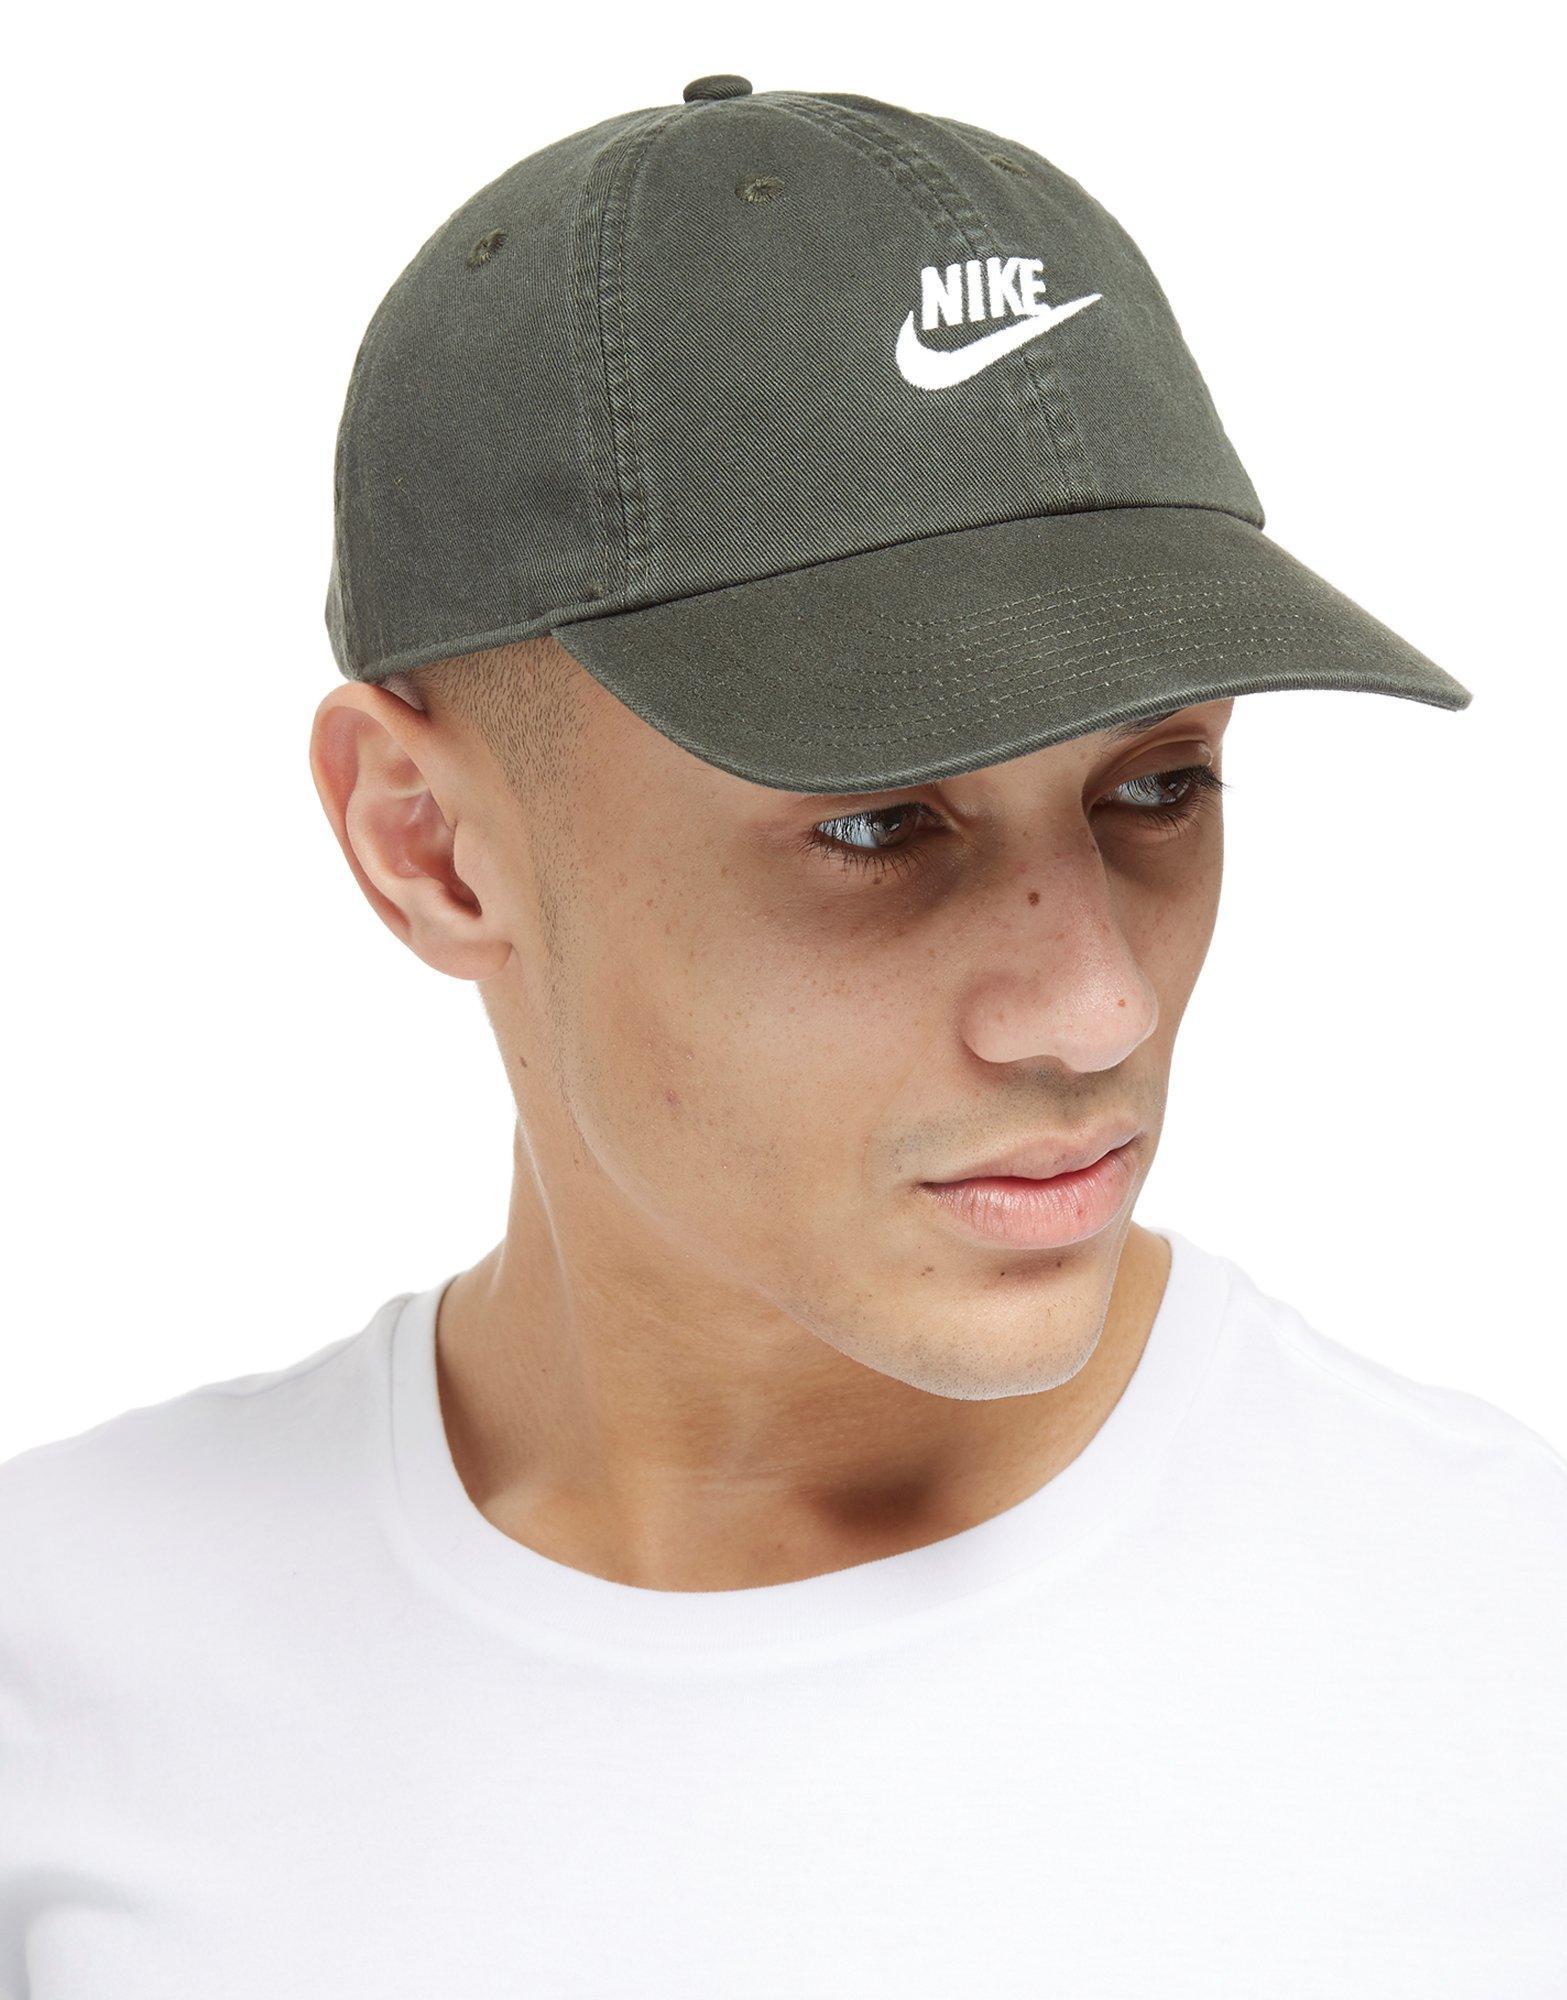 nike futura washed cap,www.spinephysiotherapy.com